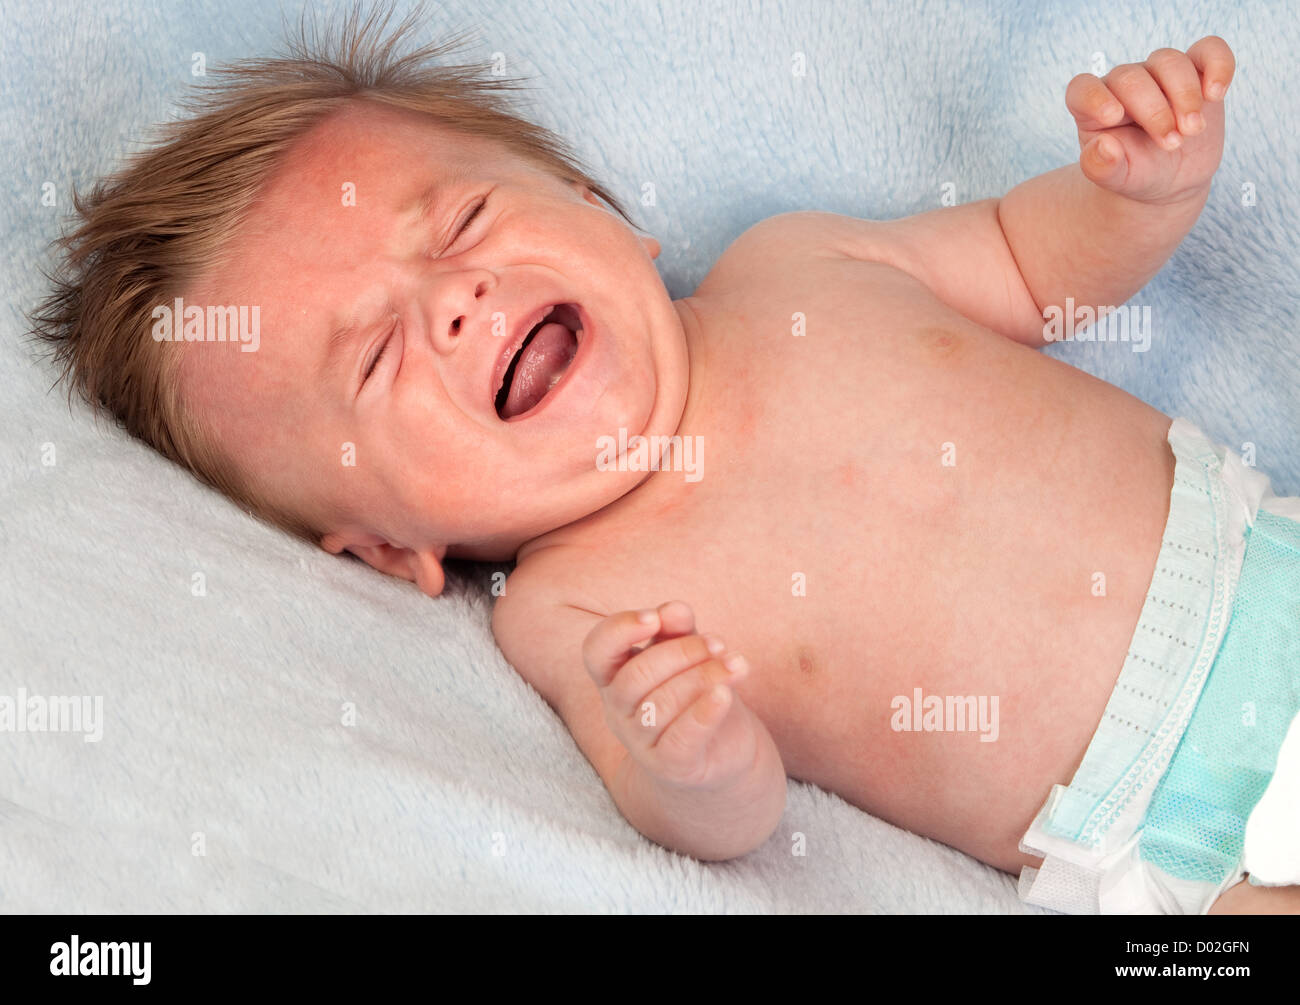 Beautiful blond baby crying on blue blanket Stock Photo